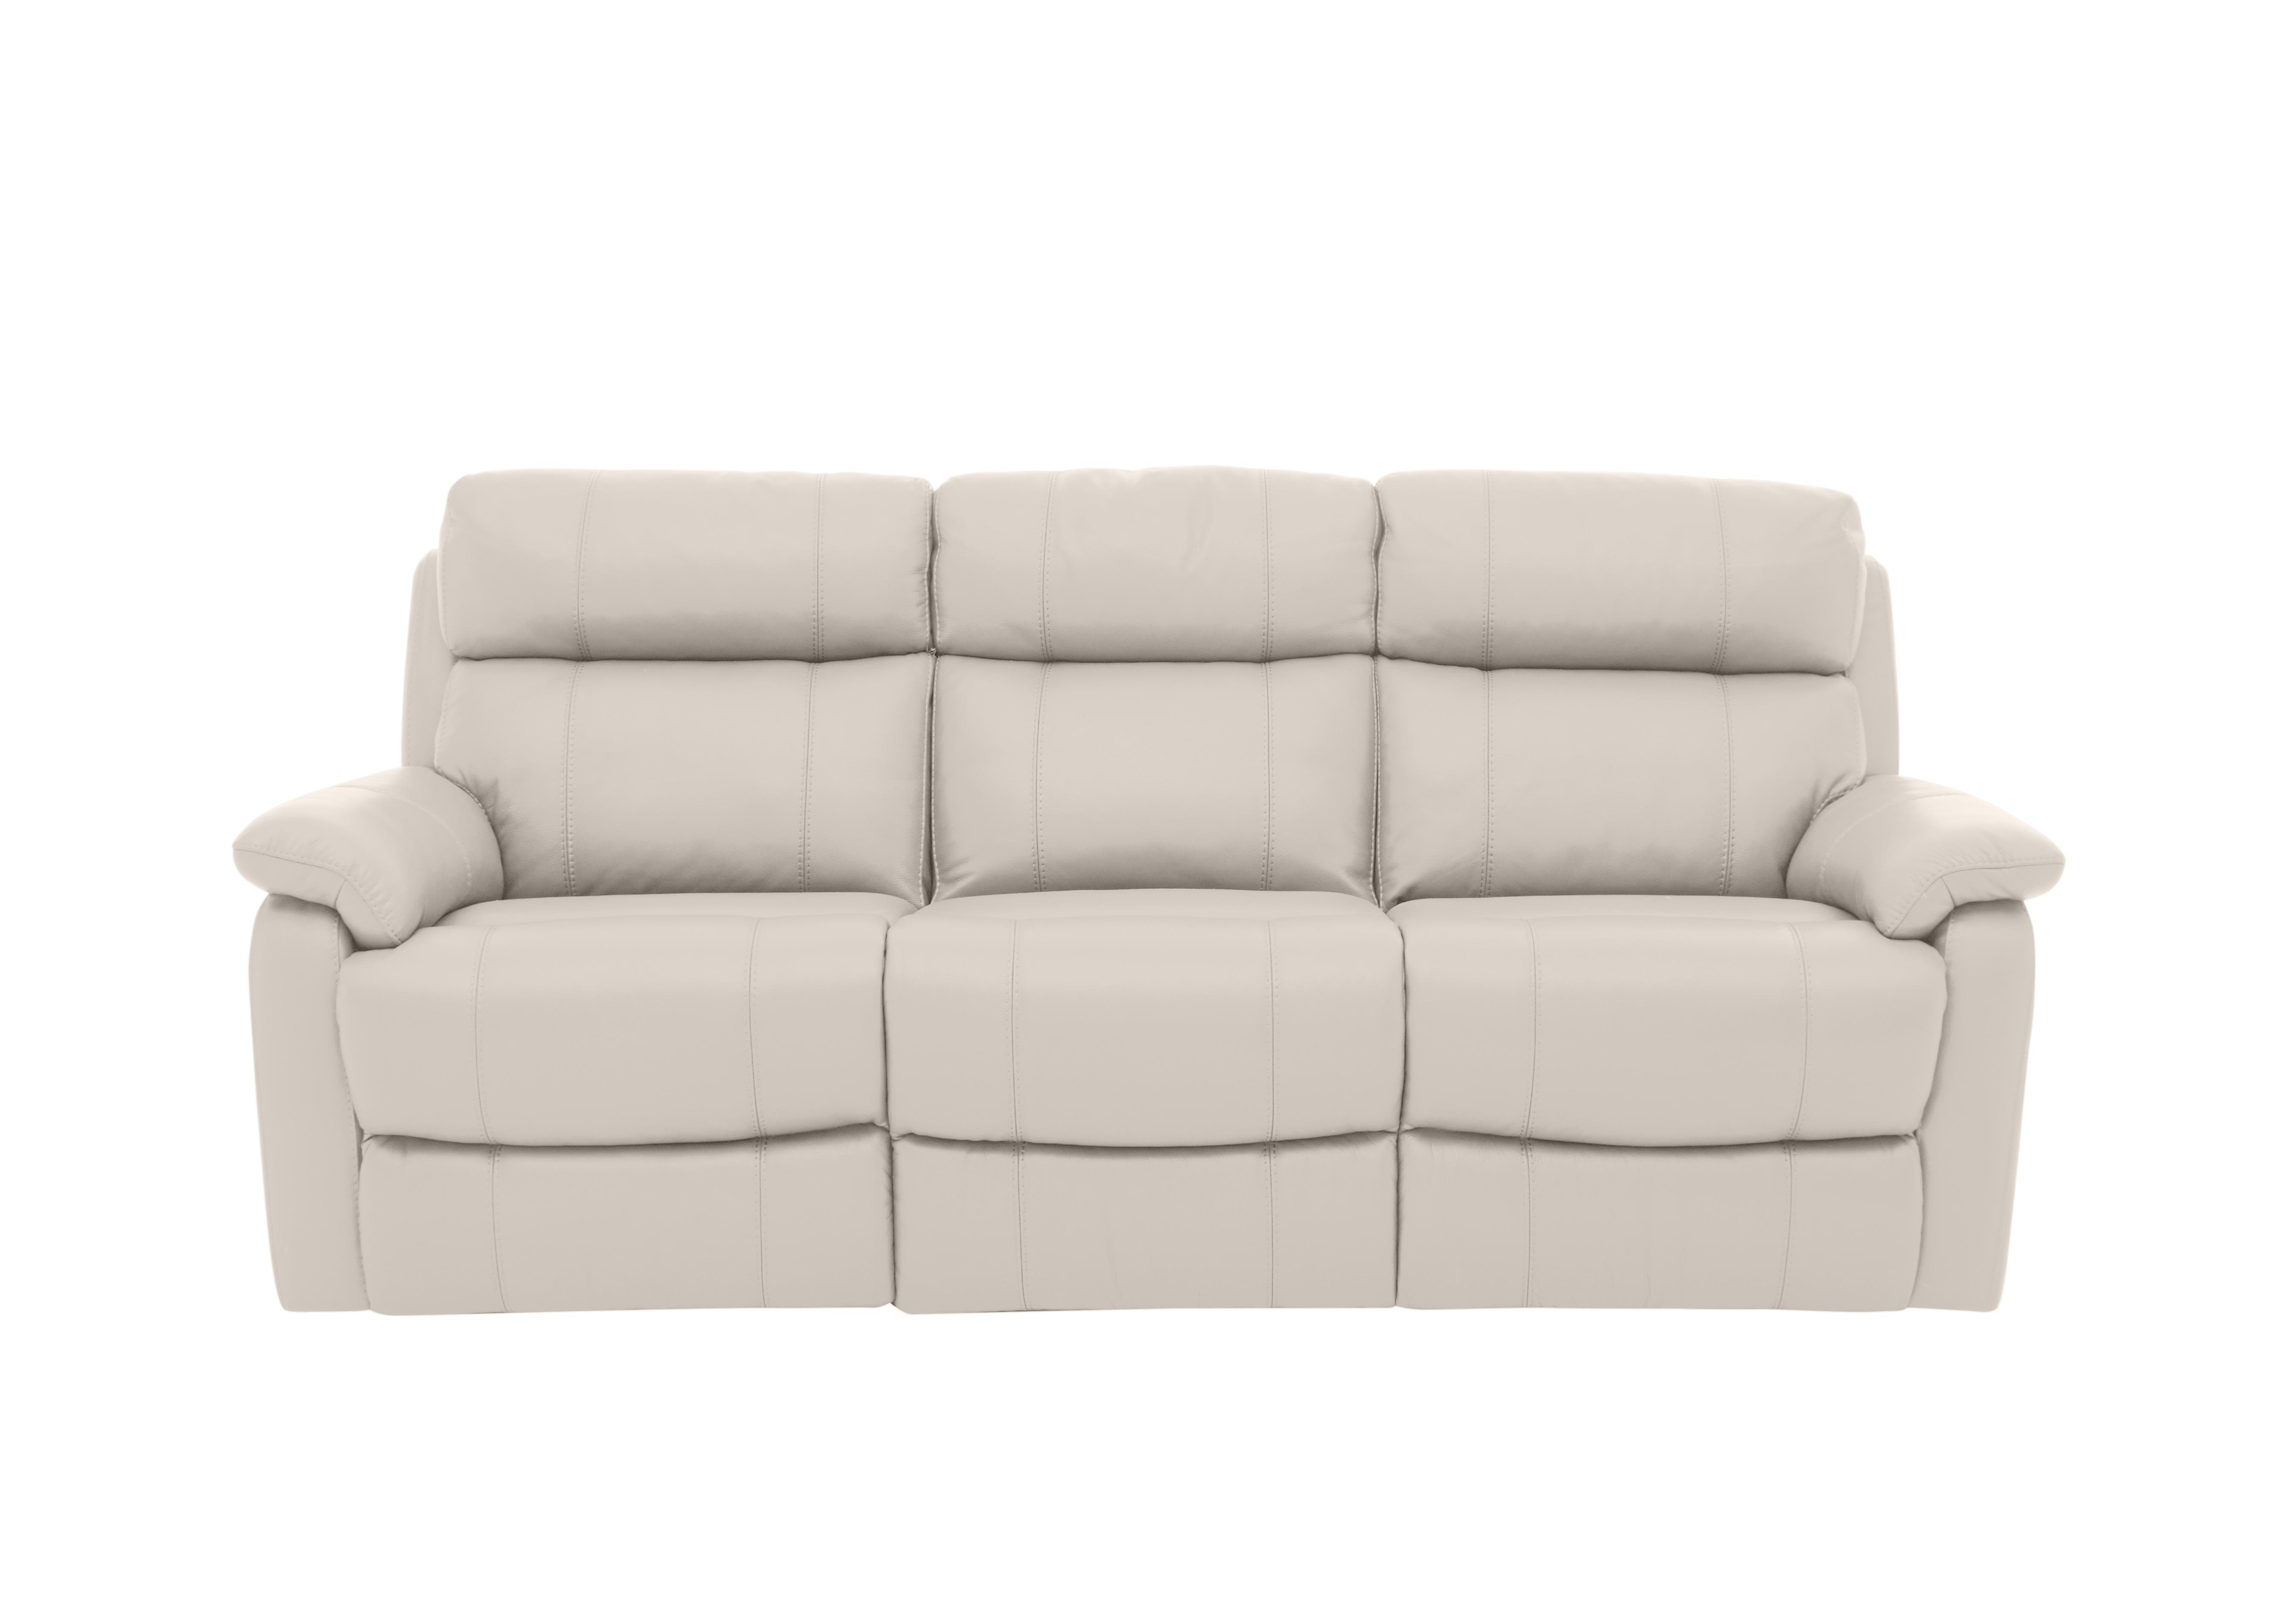 Relax Station Komodo 3 Seater Power Leather Sofa in Bv-156e Frost on Furniture Village